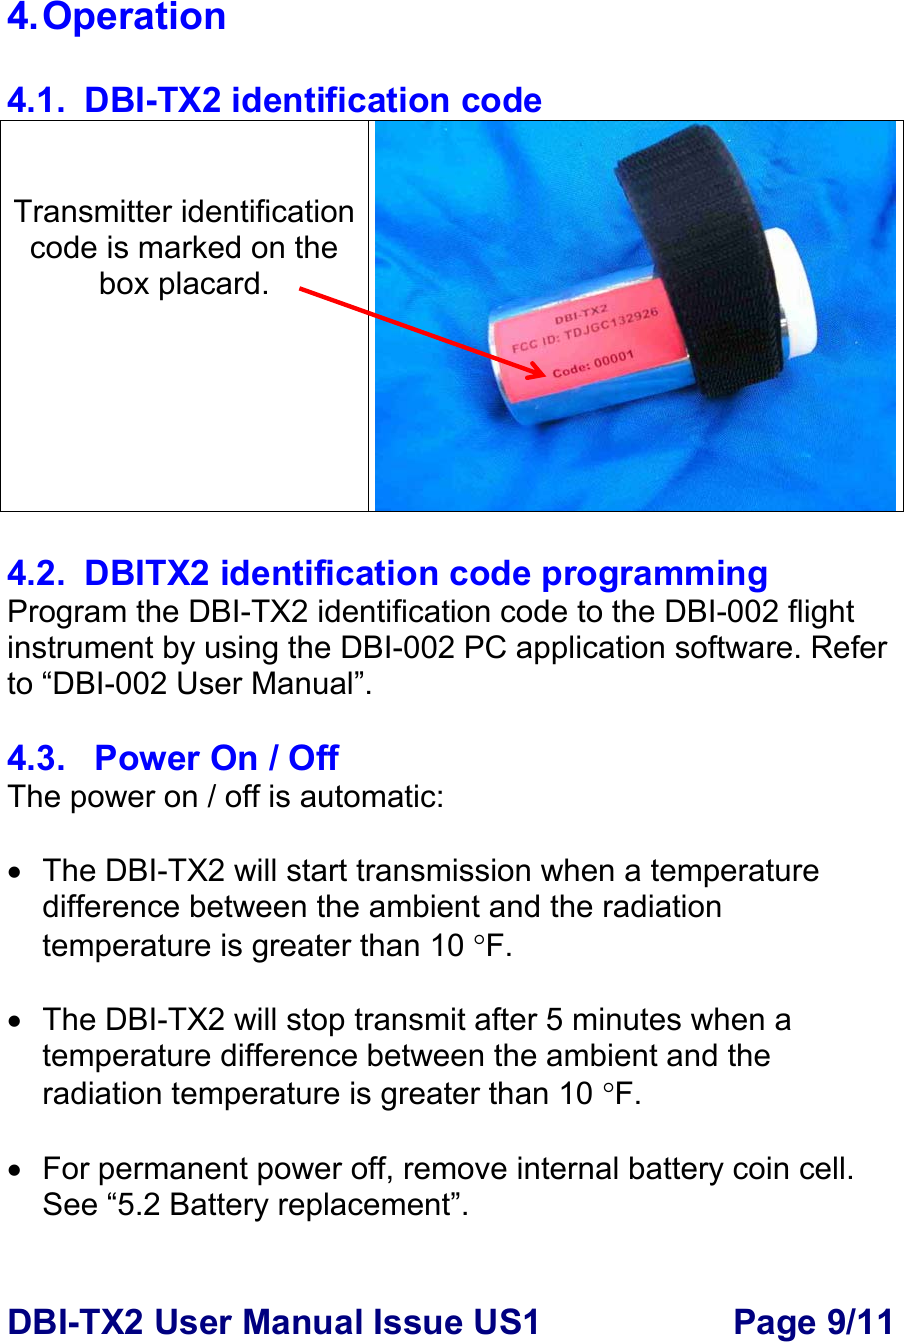 DBI-TX2 User Manual Issue US1  Page 9/11  4. Operation  4.1.  DBI-TX2 identification code   Transmitter identification code is marked on the box placard.  4.2.  DBITX2 identification code programming Program the DBI-TX2 identification code to the DBI-002 flight instrument by using the DBI-002 PC application software. Refer to “DBI-002 User Manual”.     4.3.   Power On / Off The power on / off is automatic:  •  The DBI-TX2 will start transmission when a temperature difference between the ambient and the radiation temperature is greater than 10 °F.   •  The DBI-TX2 will stop transmit after 5 minutes when a temperature difference between the ambient and the radiation temperature is greater than 10 °F.  •  For permanent power off, remove internal battery coin cell. See “5.2 Battery replacement”.   